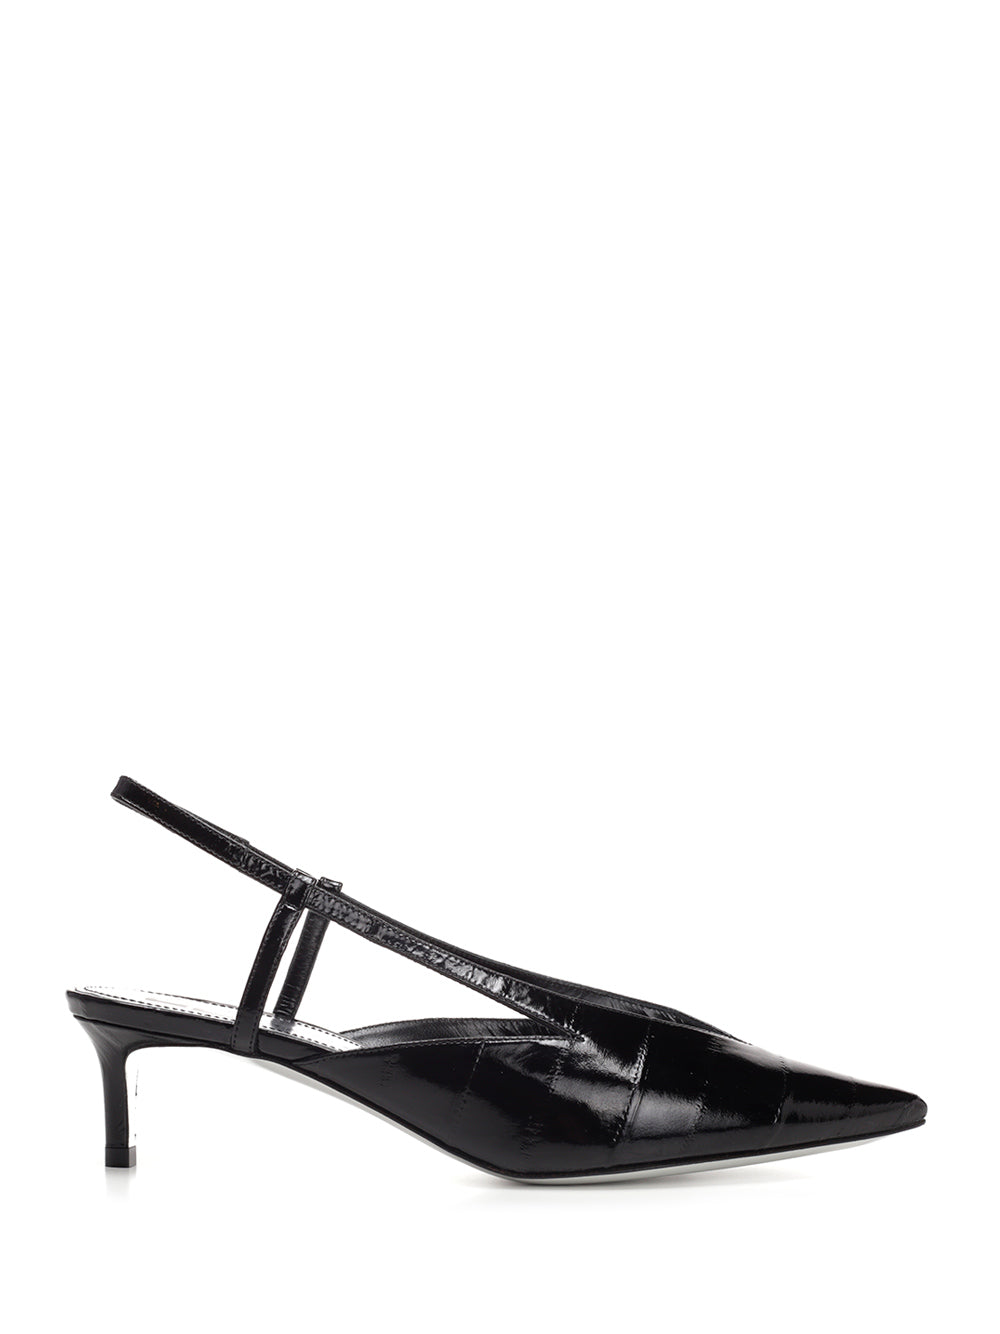 GIVENCHY GIVENCHY POINTED TOE SLINGBACK PUMPS